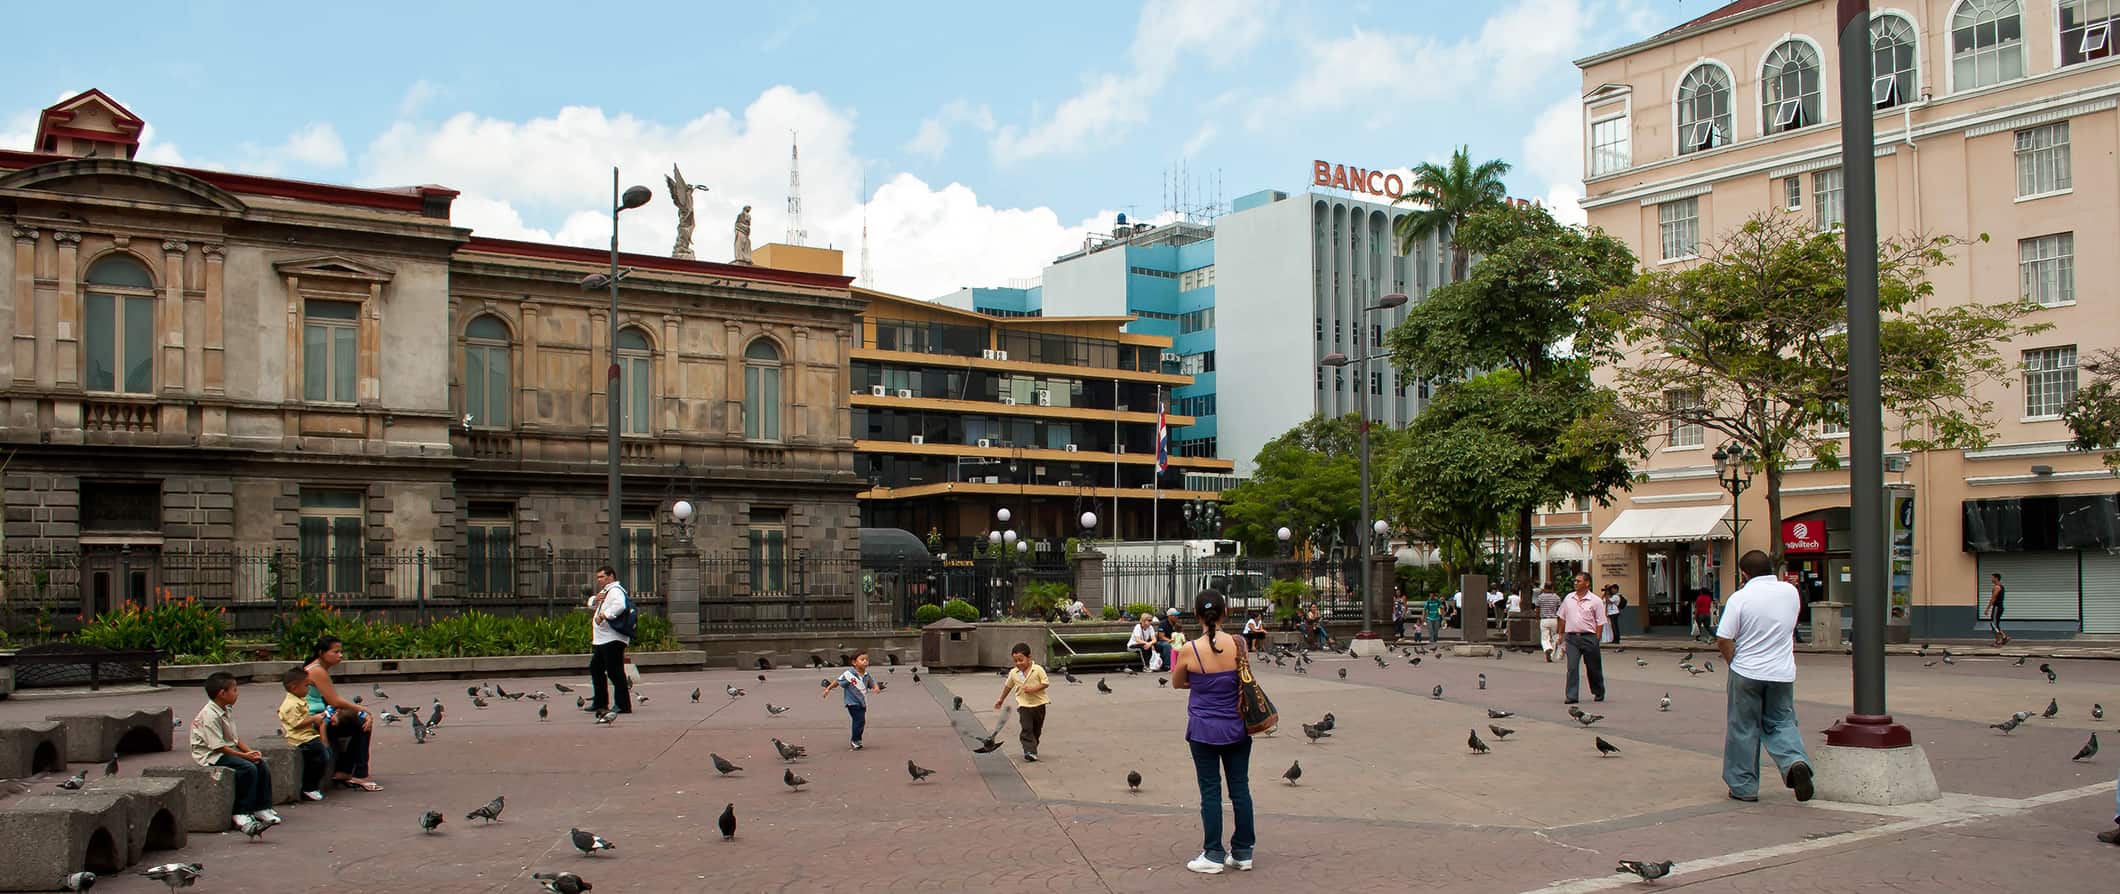 People walking around a central square filled with pigeons in San Jose, Costa Rica